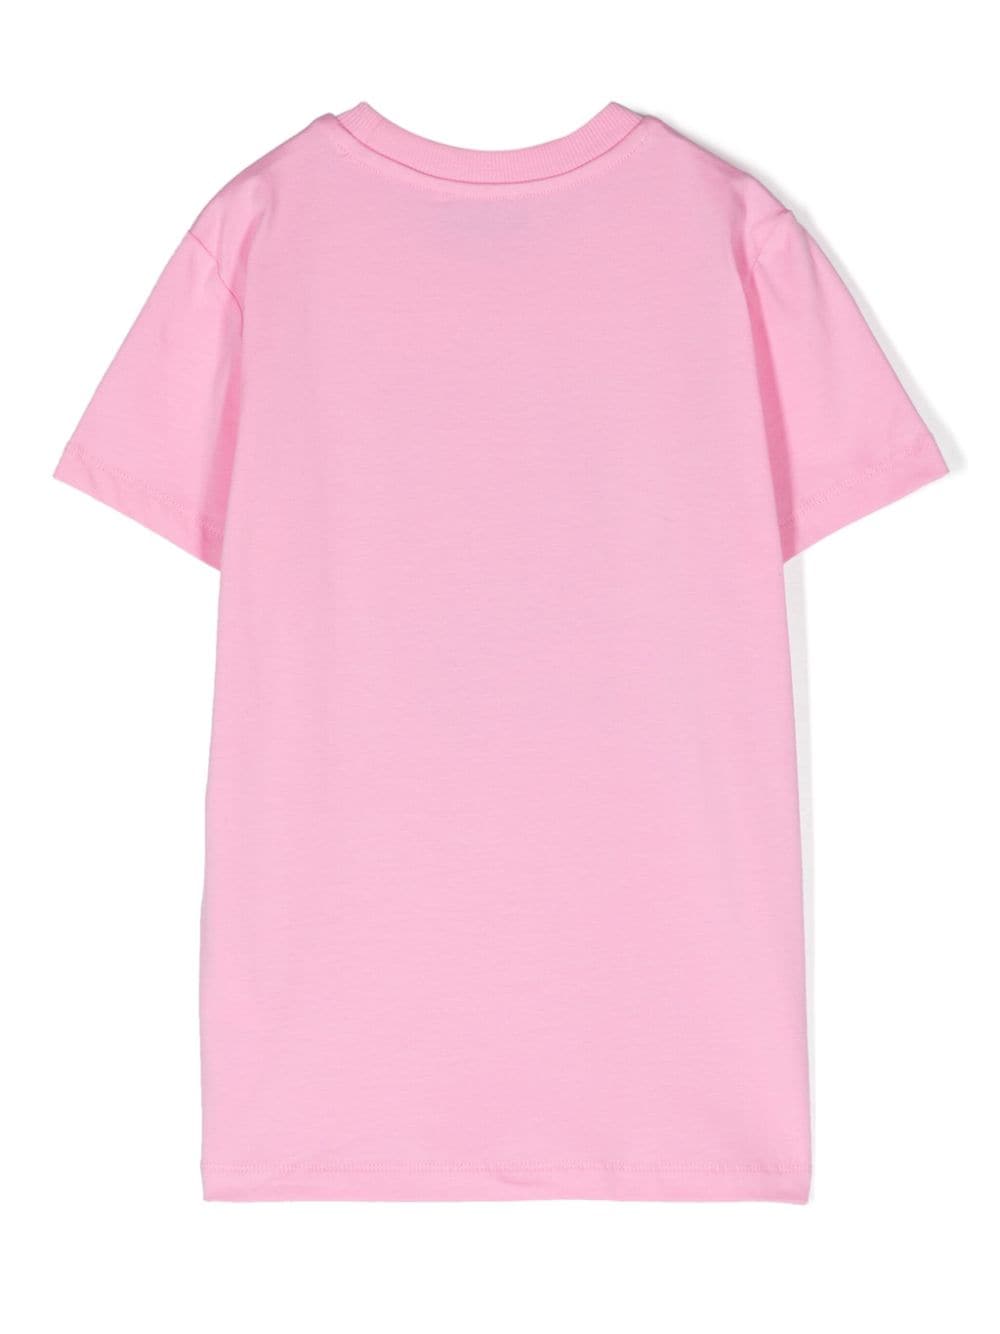 Pink t-shirt for girls with print